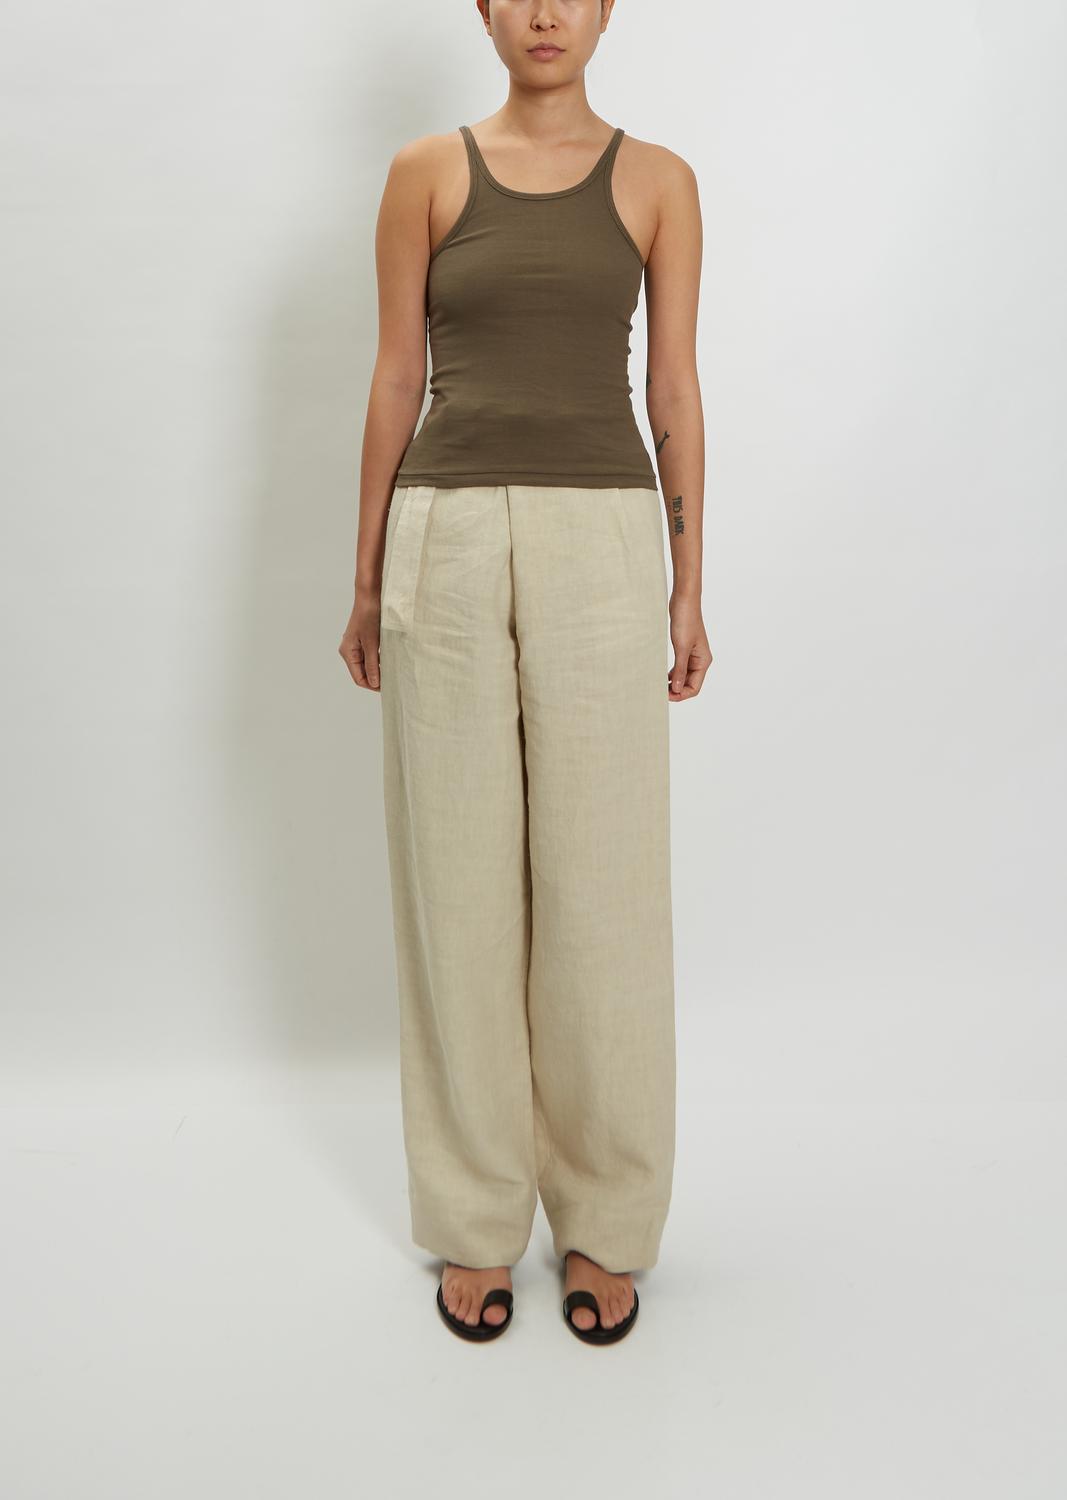 ARCH THE Cotton Jersey Tank Top in Khaki